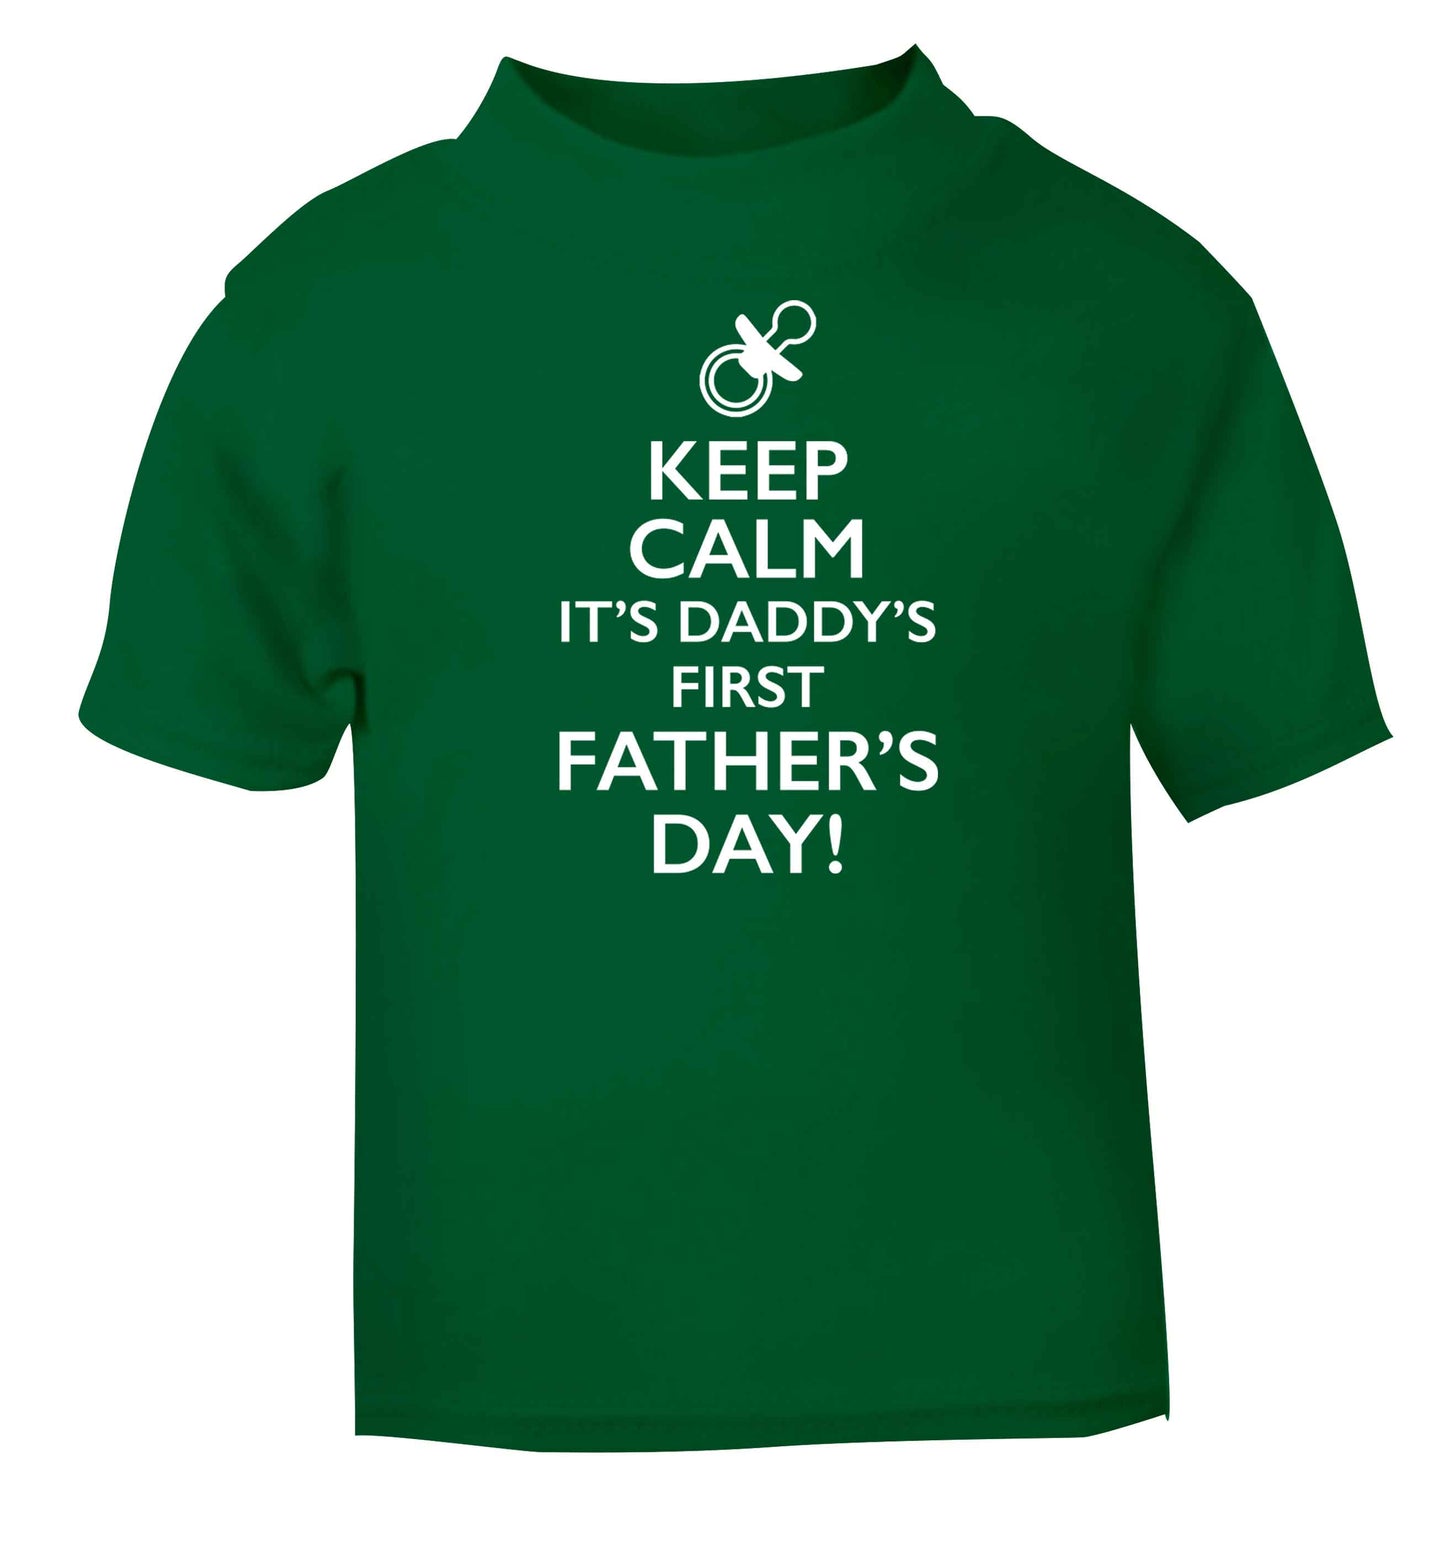 Keep calm it's daddys first father's day green baby toddler Tshirt 2 Years